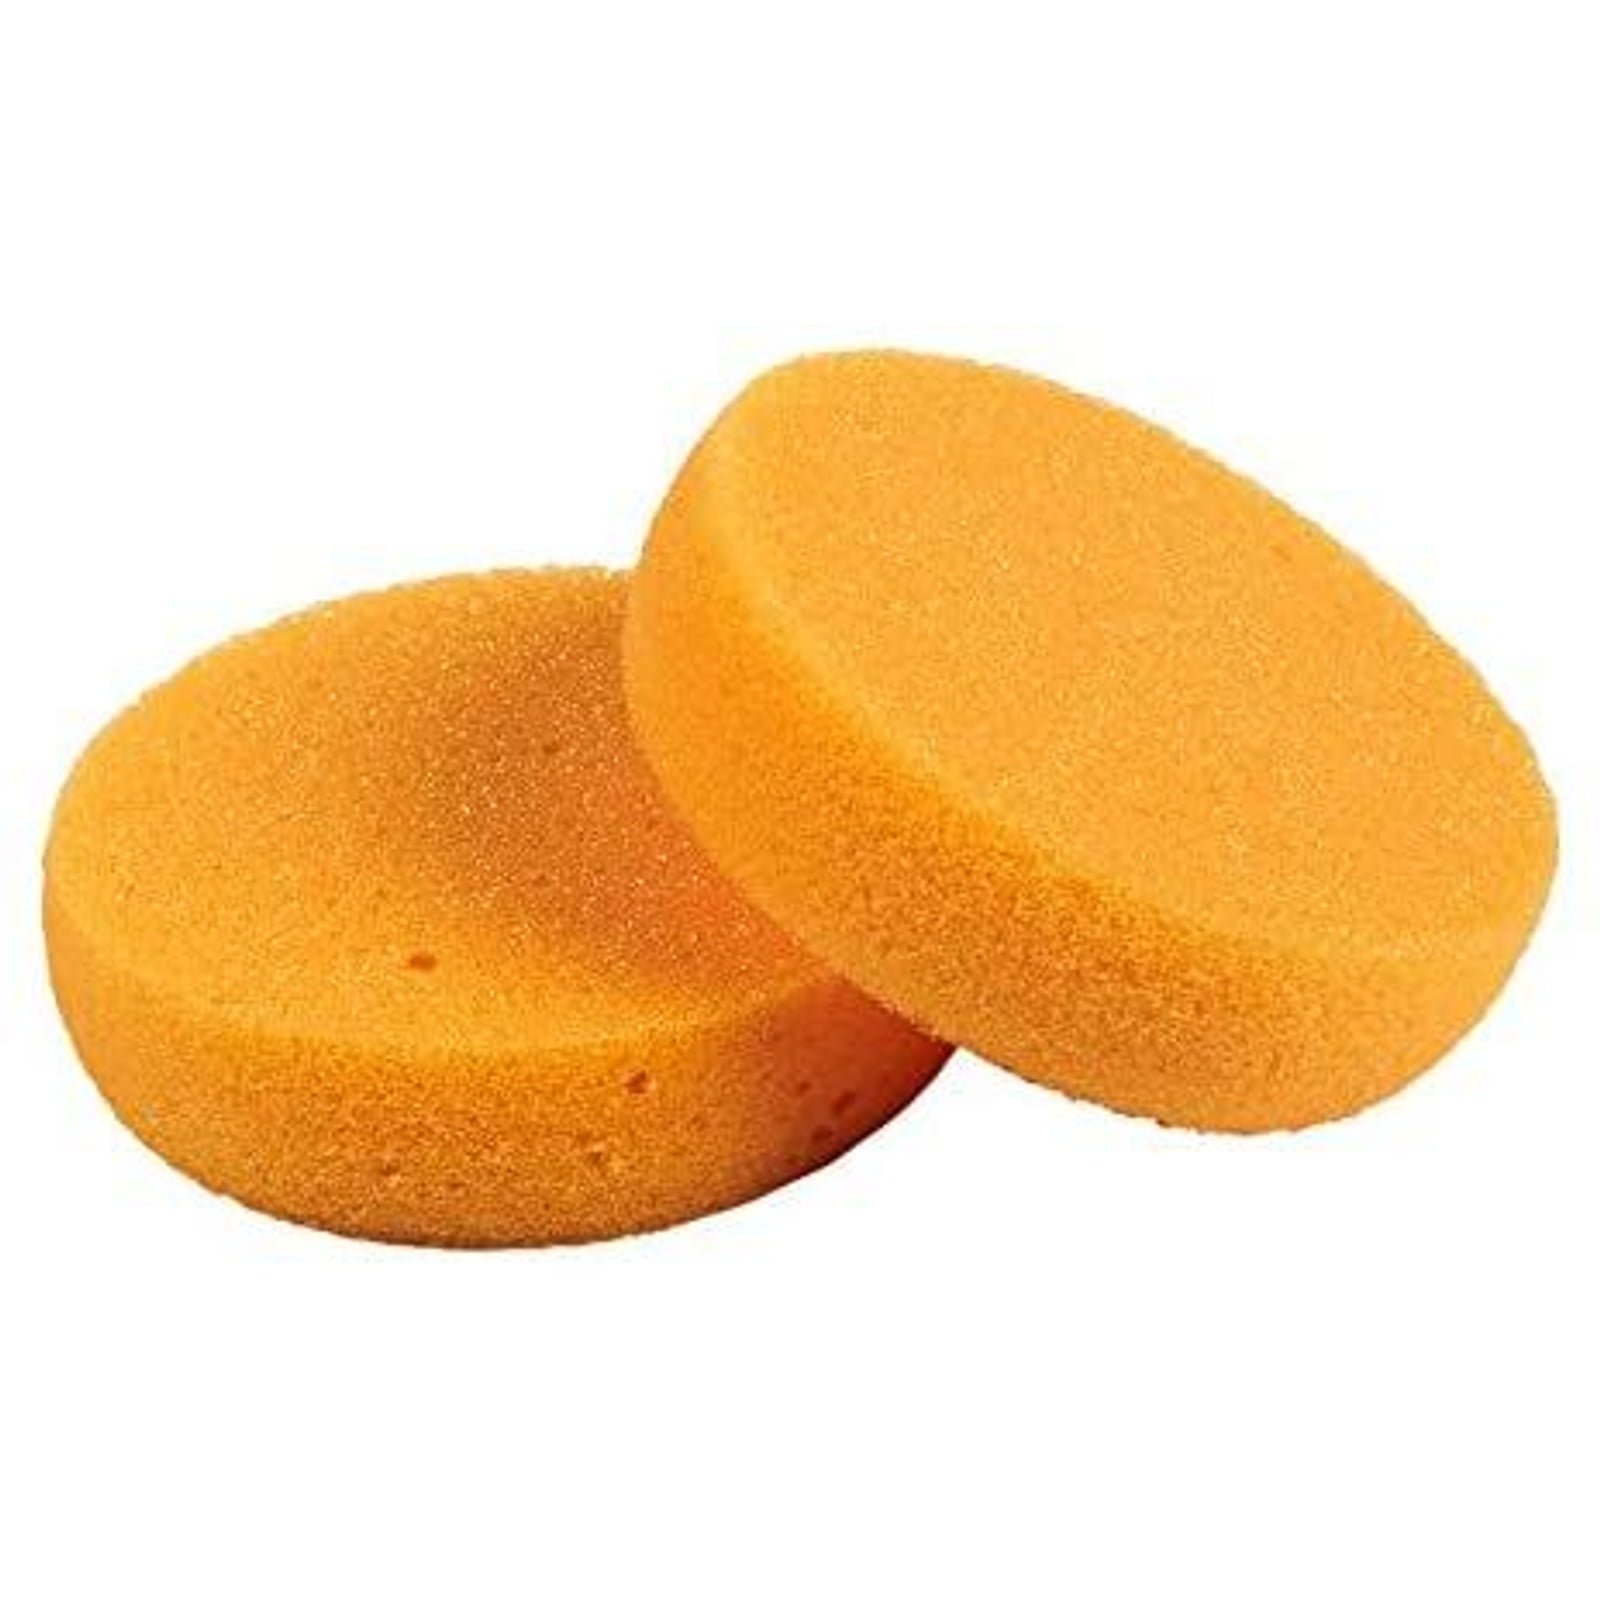 Artists Painting 15pc Value Pack for Crafts & Hobbies DIY by Lullingworth Premium Synthetic Art Crafts Sponges Pottery Face Paint 